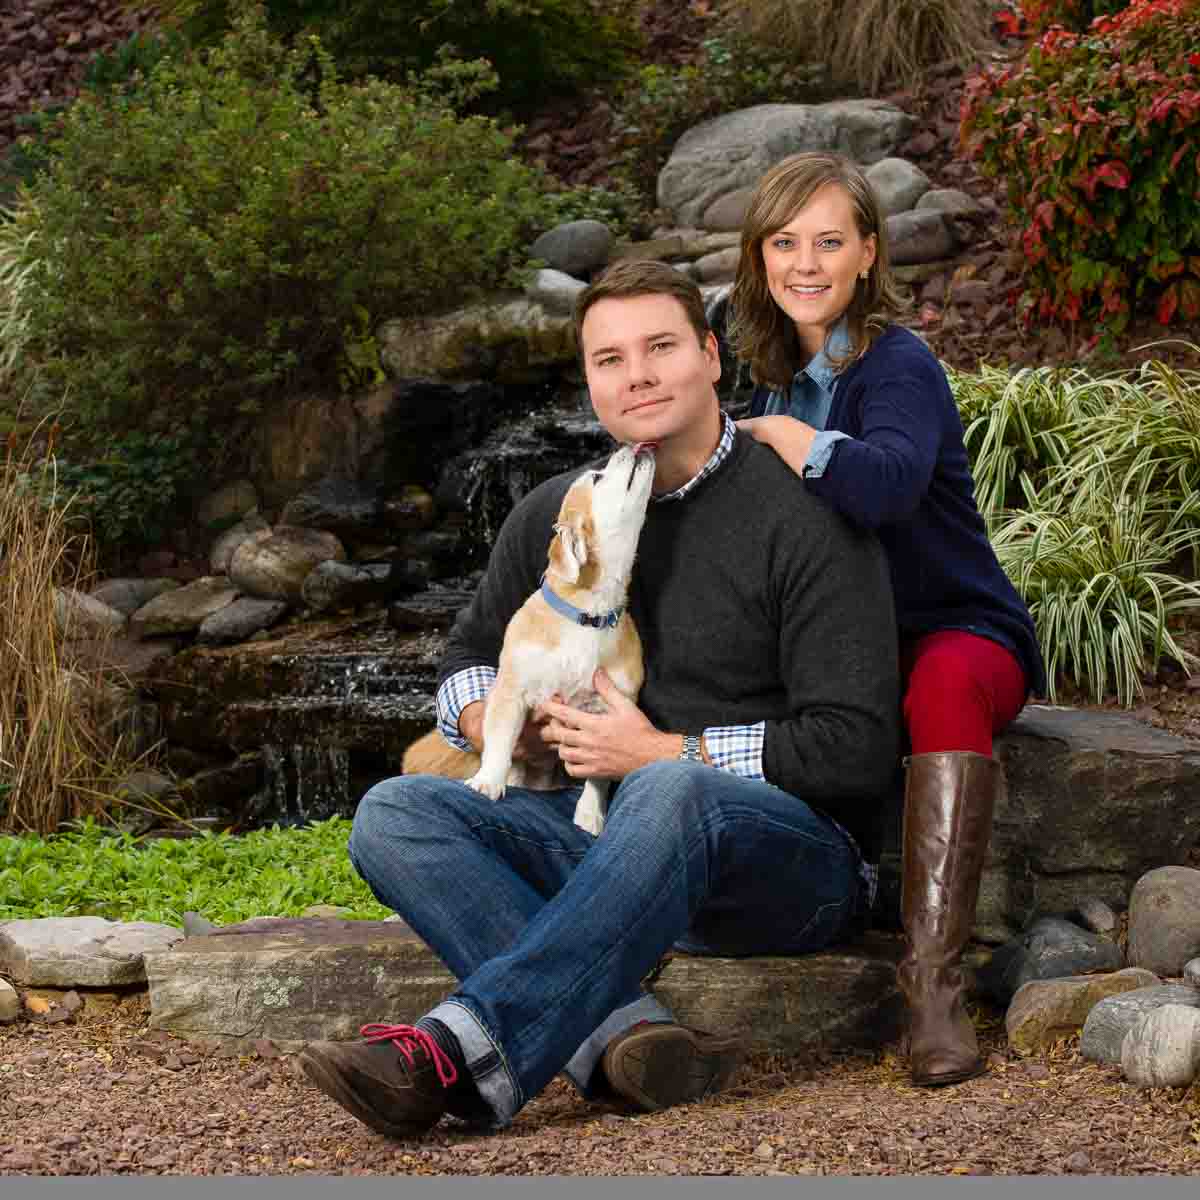 A man and woman sitting on the ground with their dog.